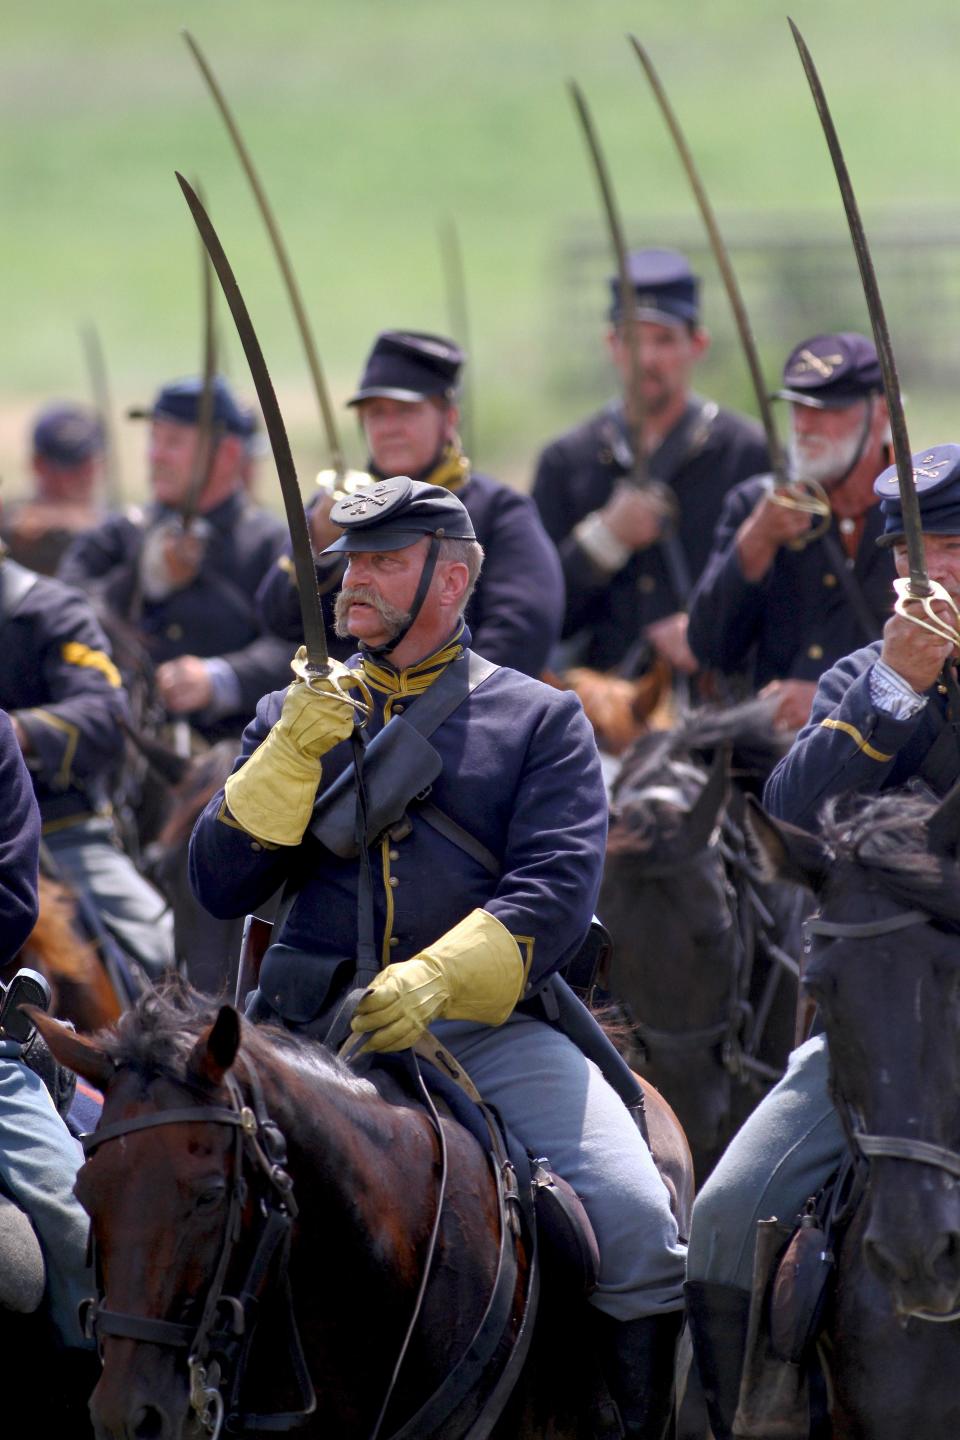 This year’s 160th anniversary reenactment will include infantry, artillery, and calvary tacticals each day of the
event. Presentations, author book signing, sutlers and food vendors will also be participating.